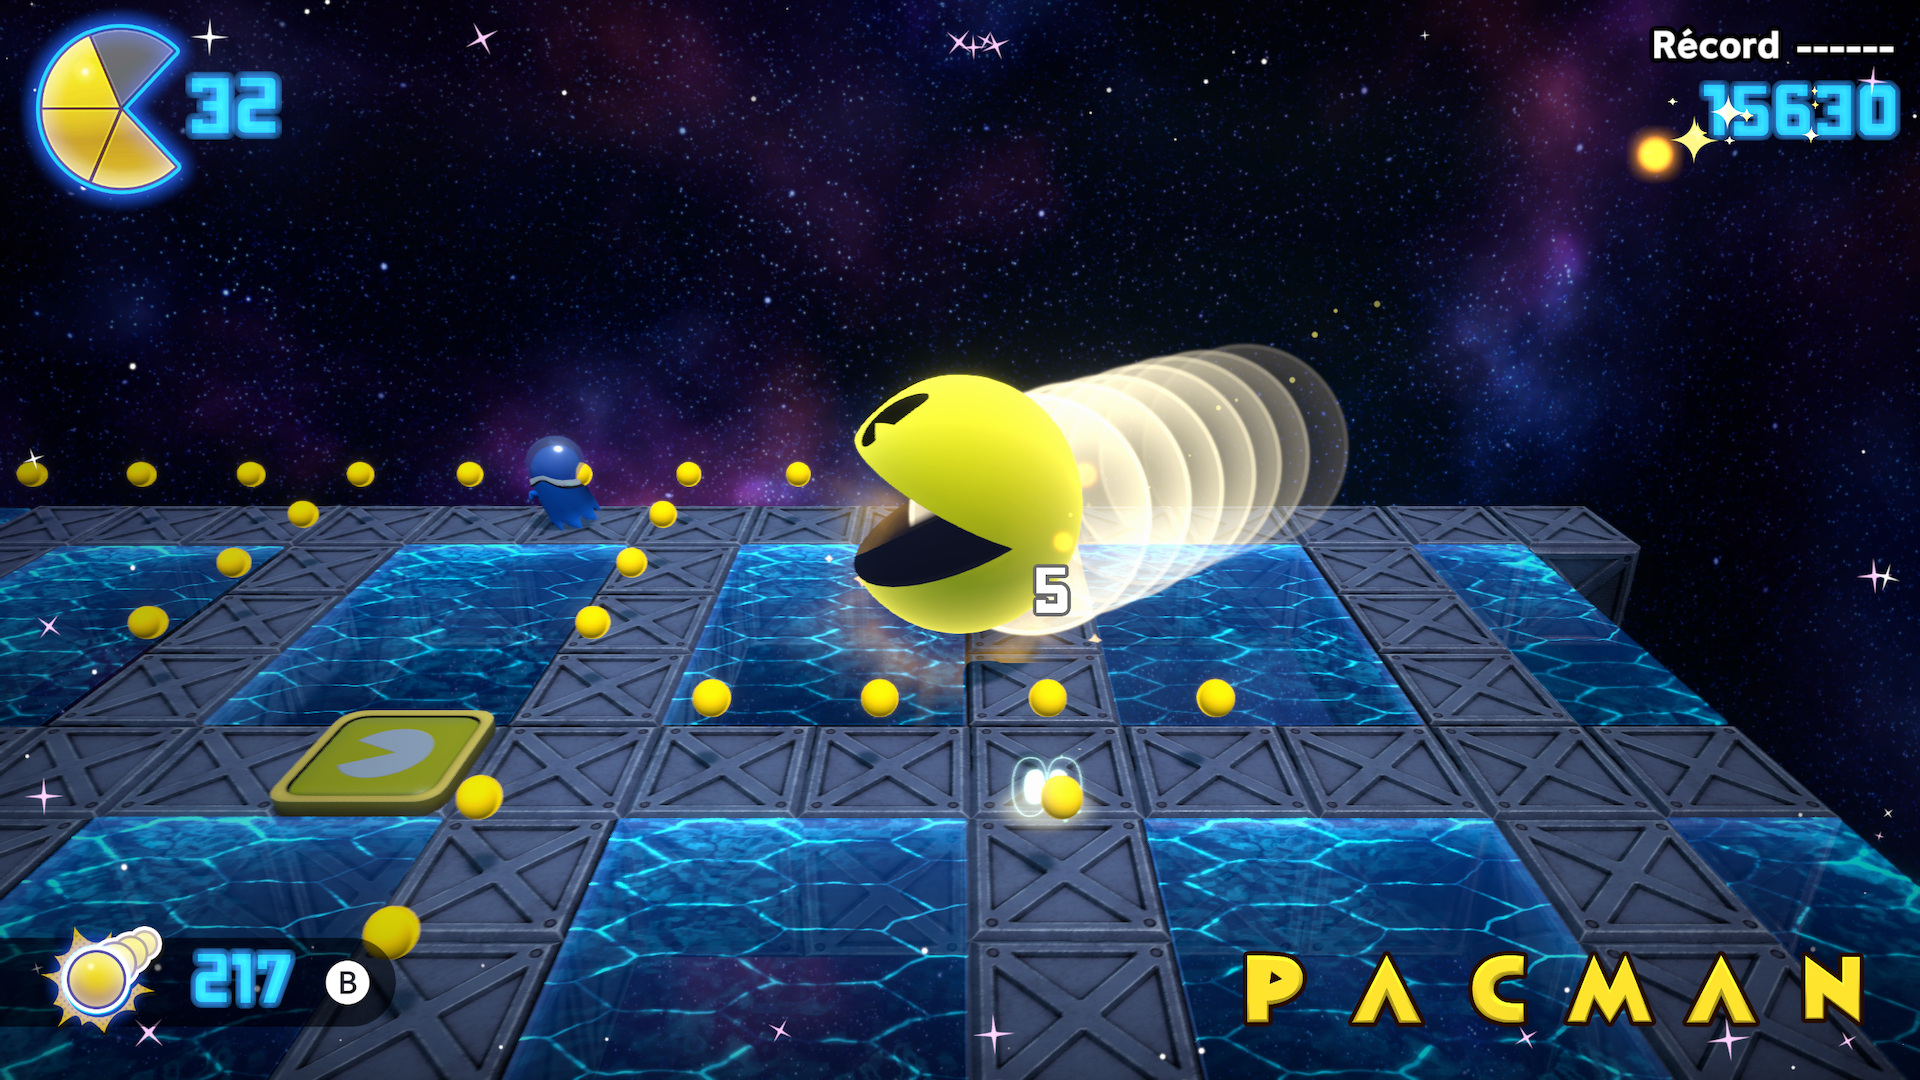 PAC-MAN WORLD Re-PAC Cuenta Compartida Xbox One Xbox Series